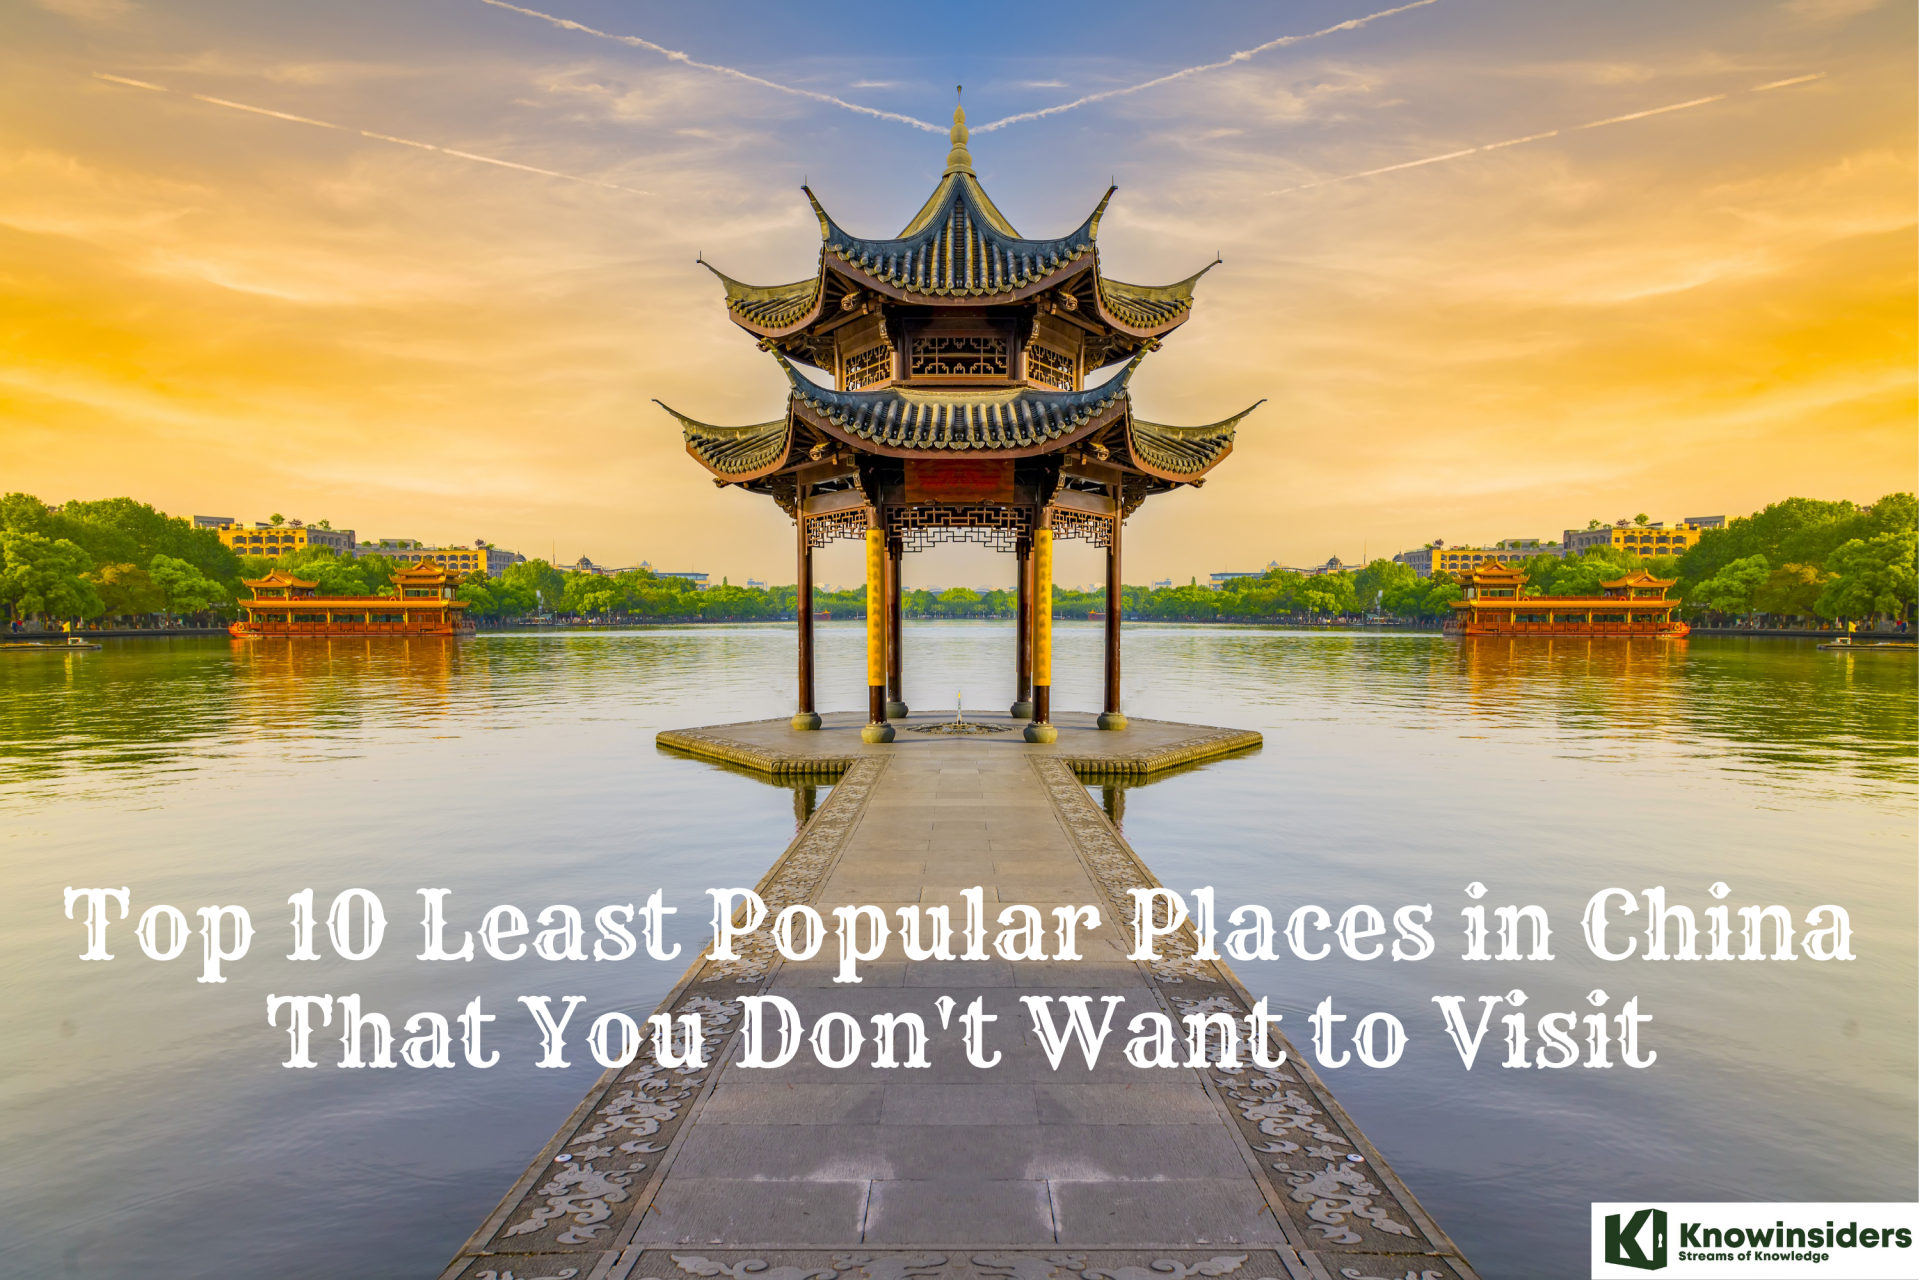 Top 10 Least-Visisted Places in China Makes You Surprised